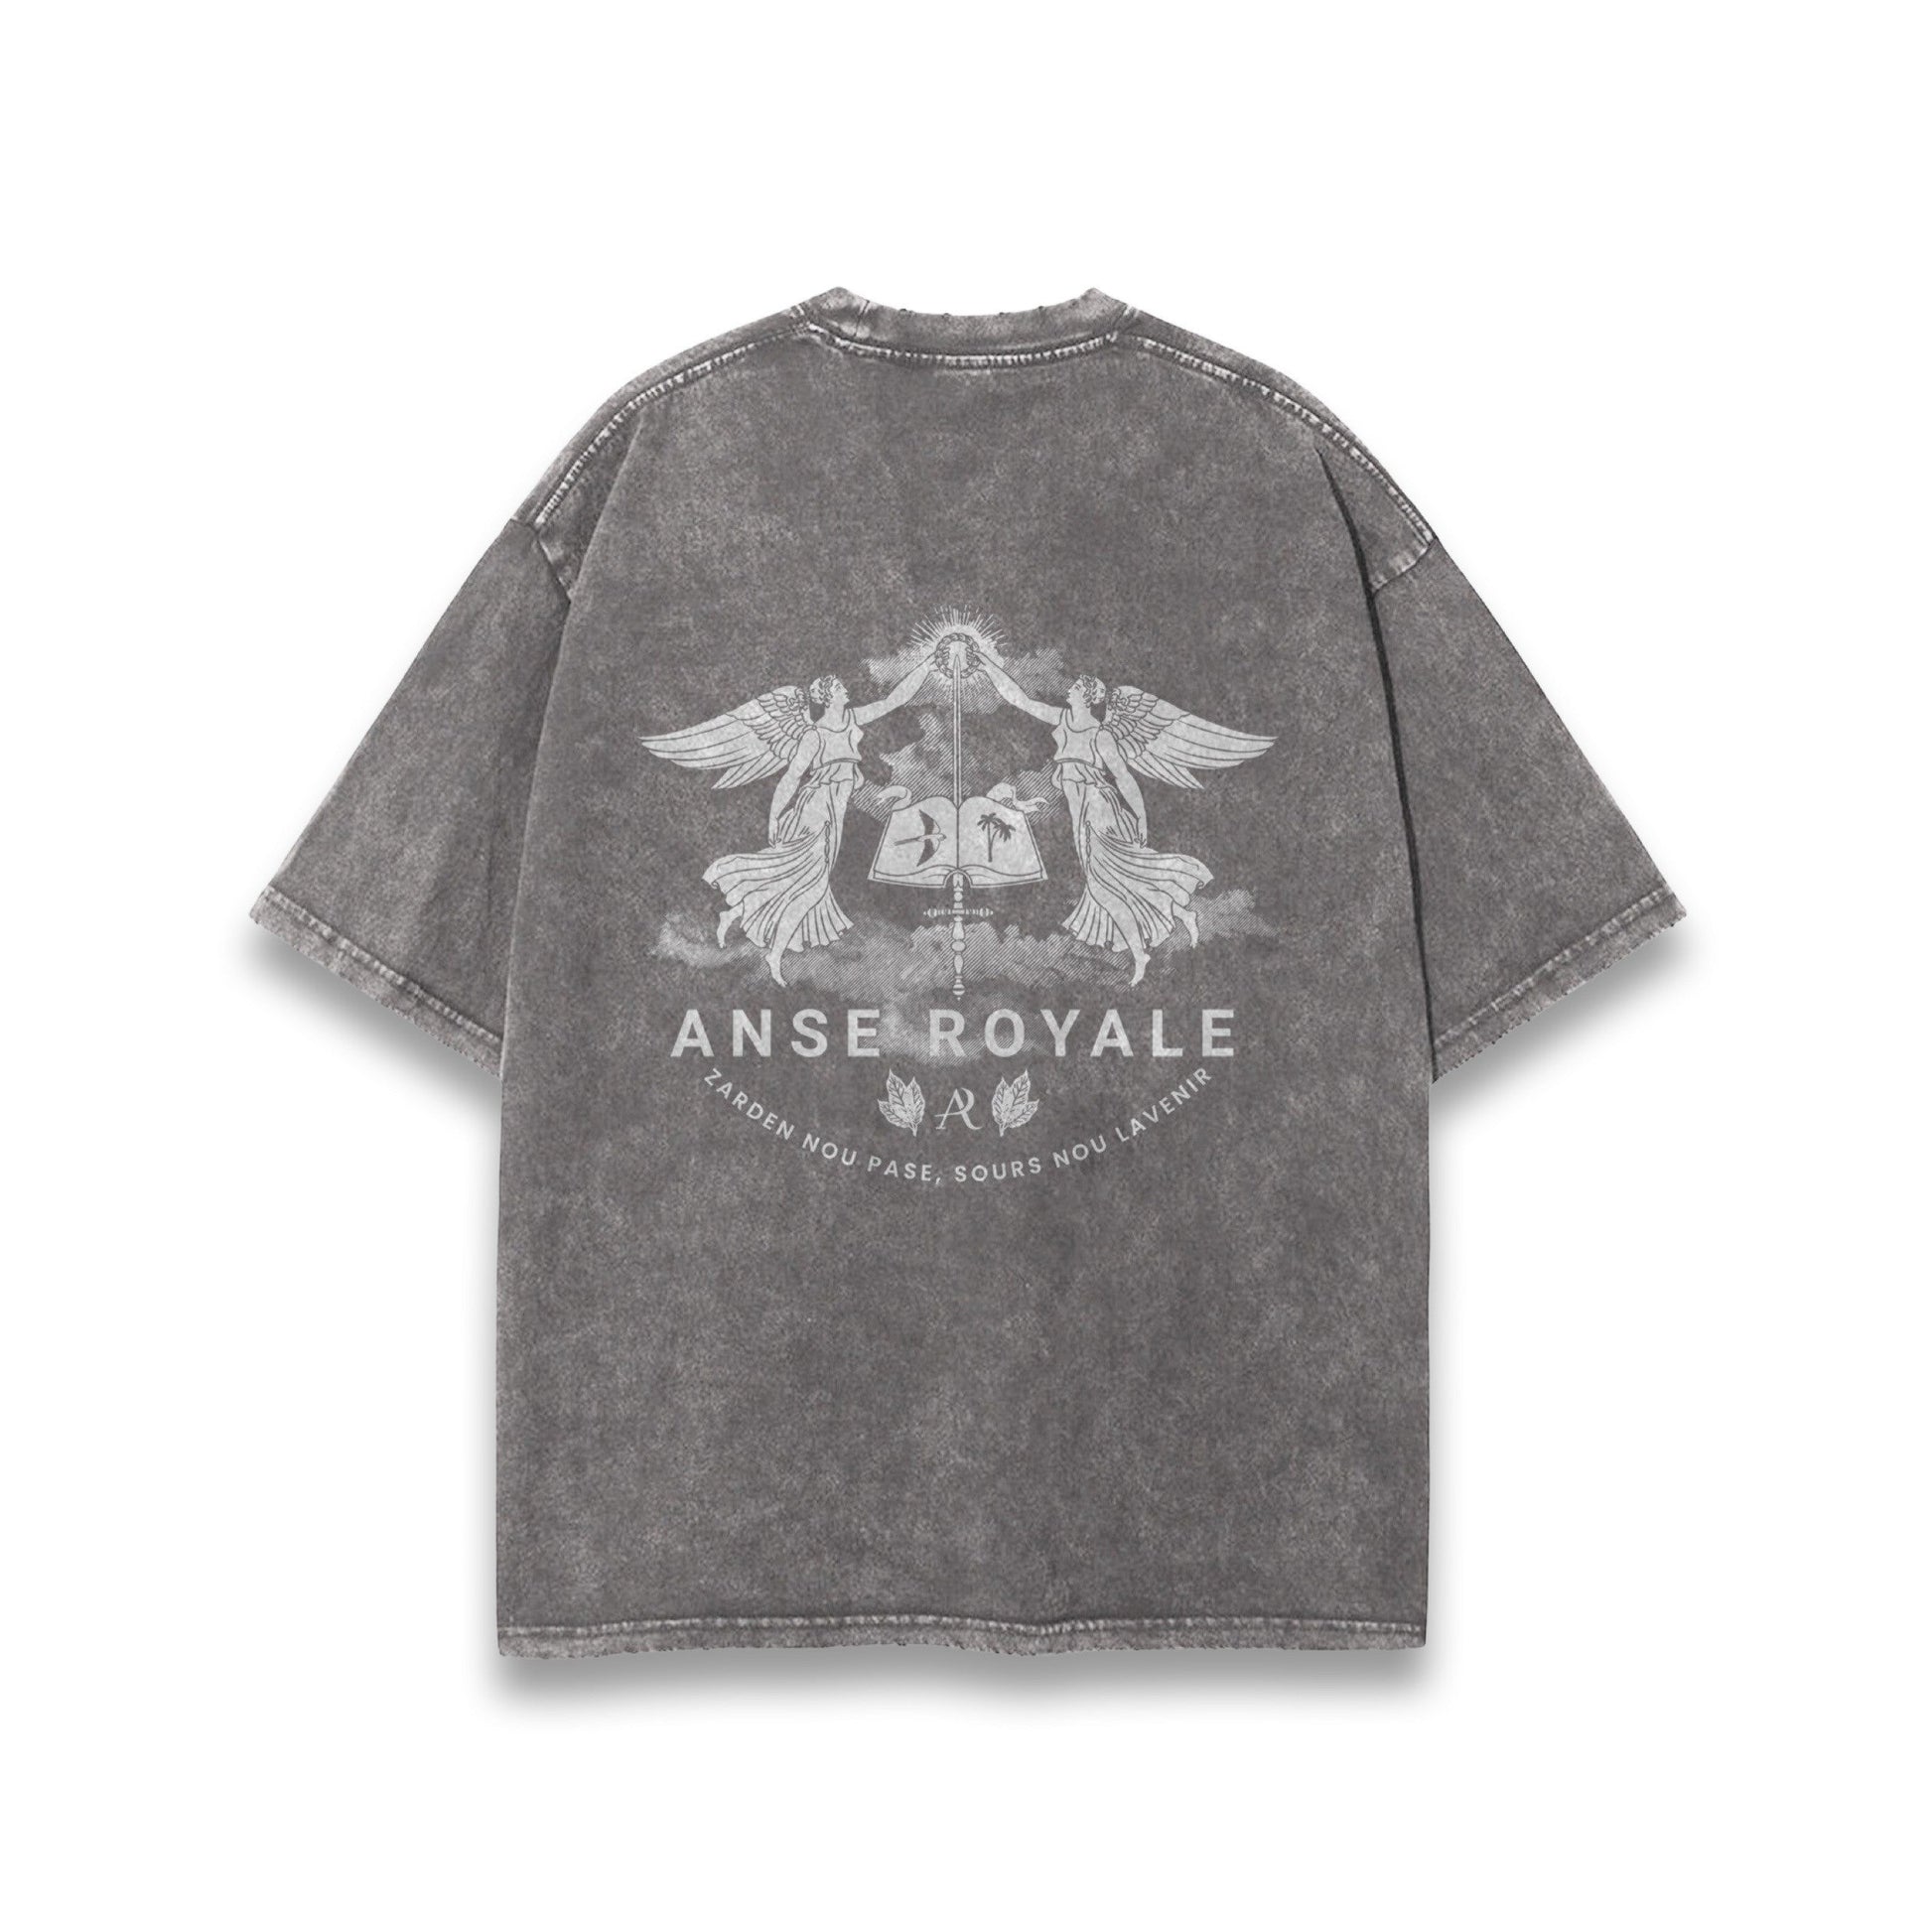 ZARDEN - Premium Shirts & Tops from ANSE ROYALE - Just $70! Shop now at ANSE ROYALE